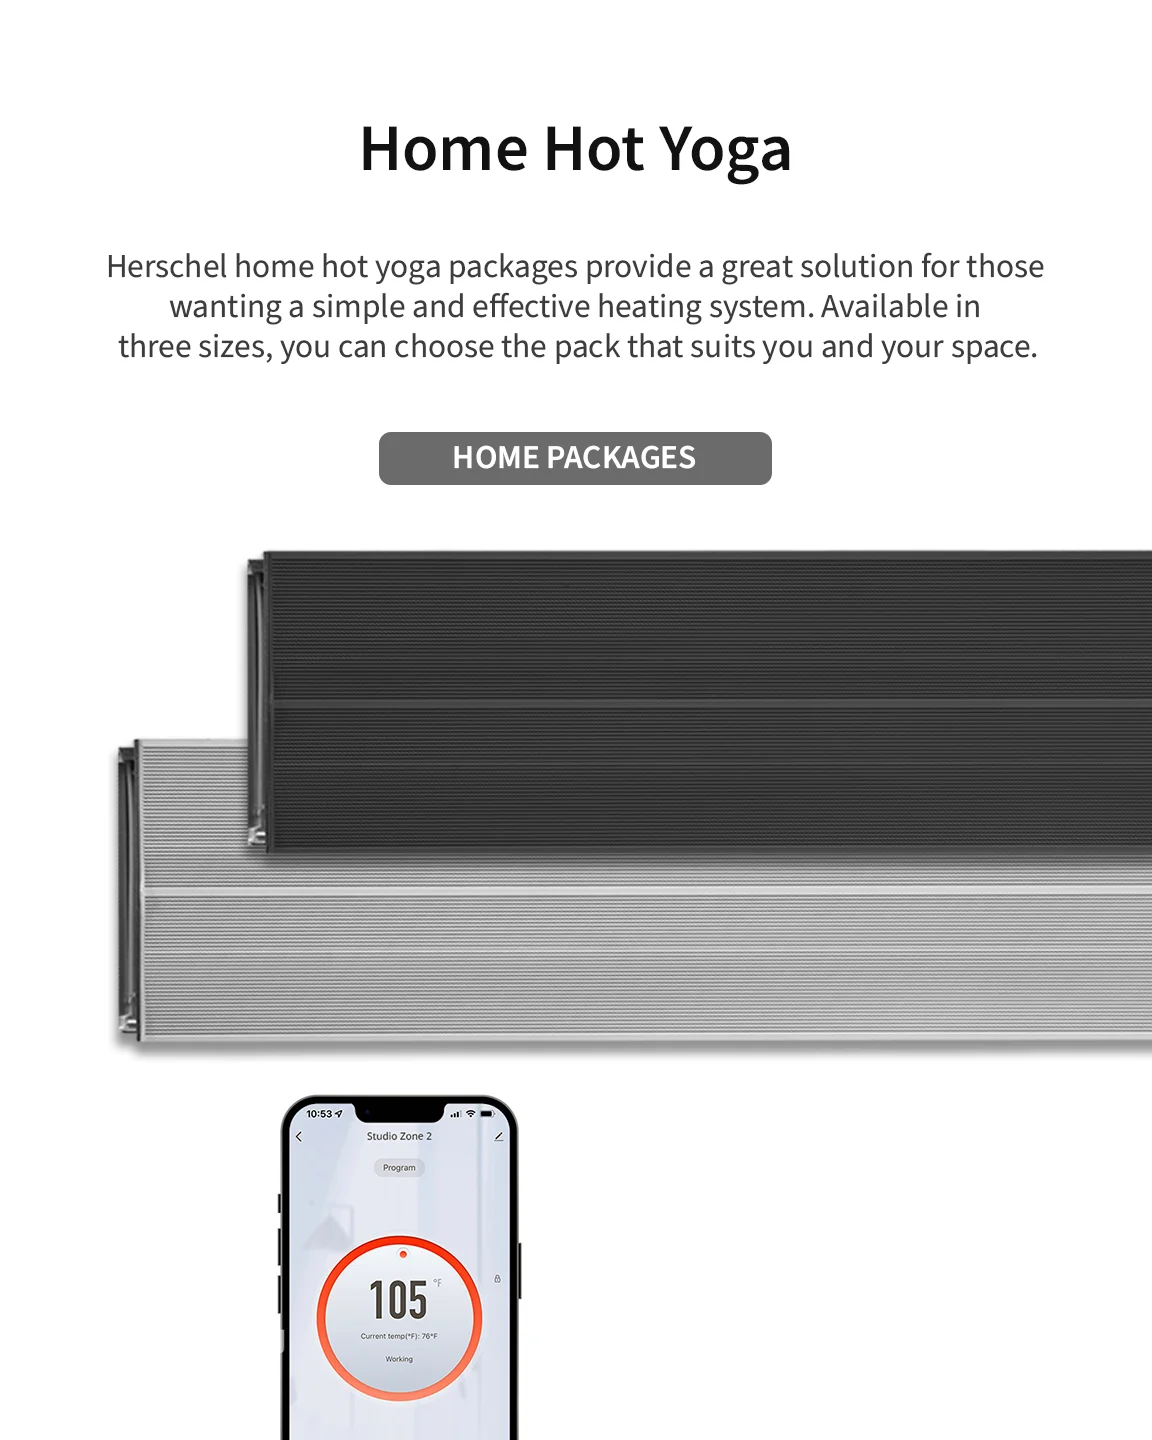 Home hot yoga infrared packages